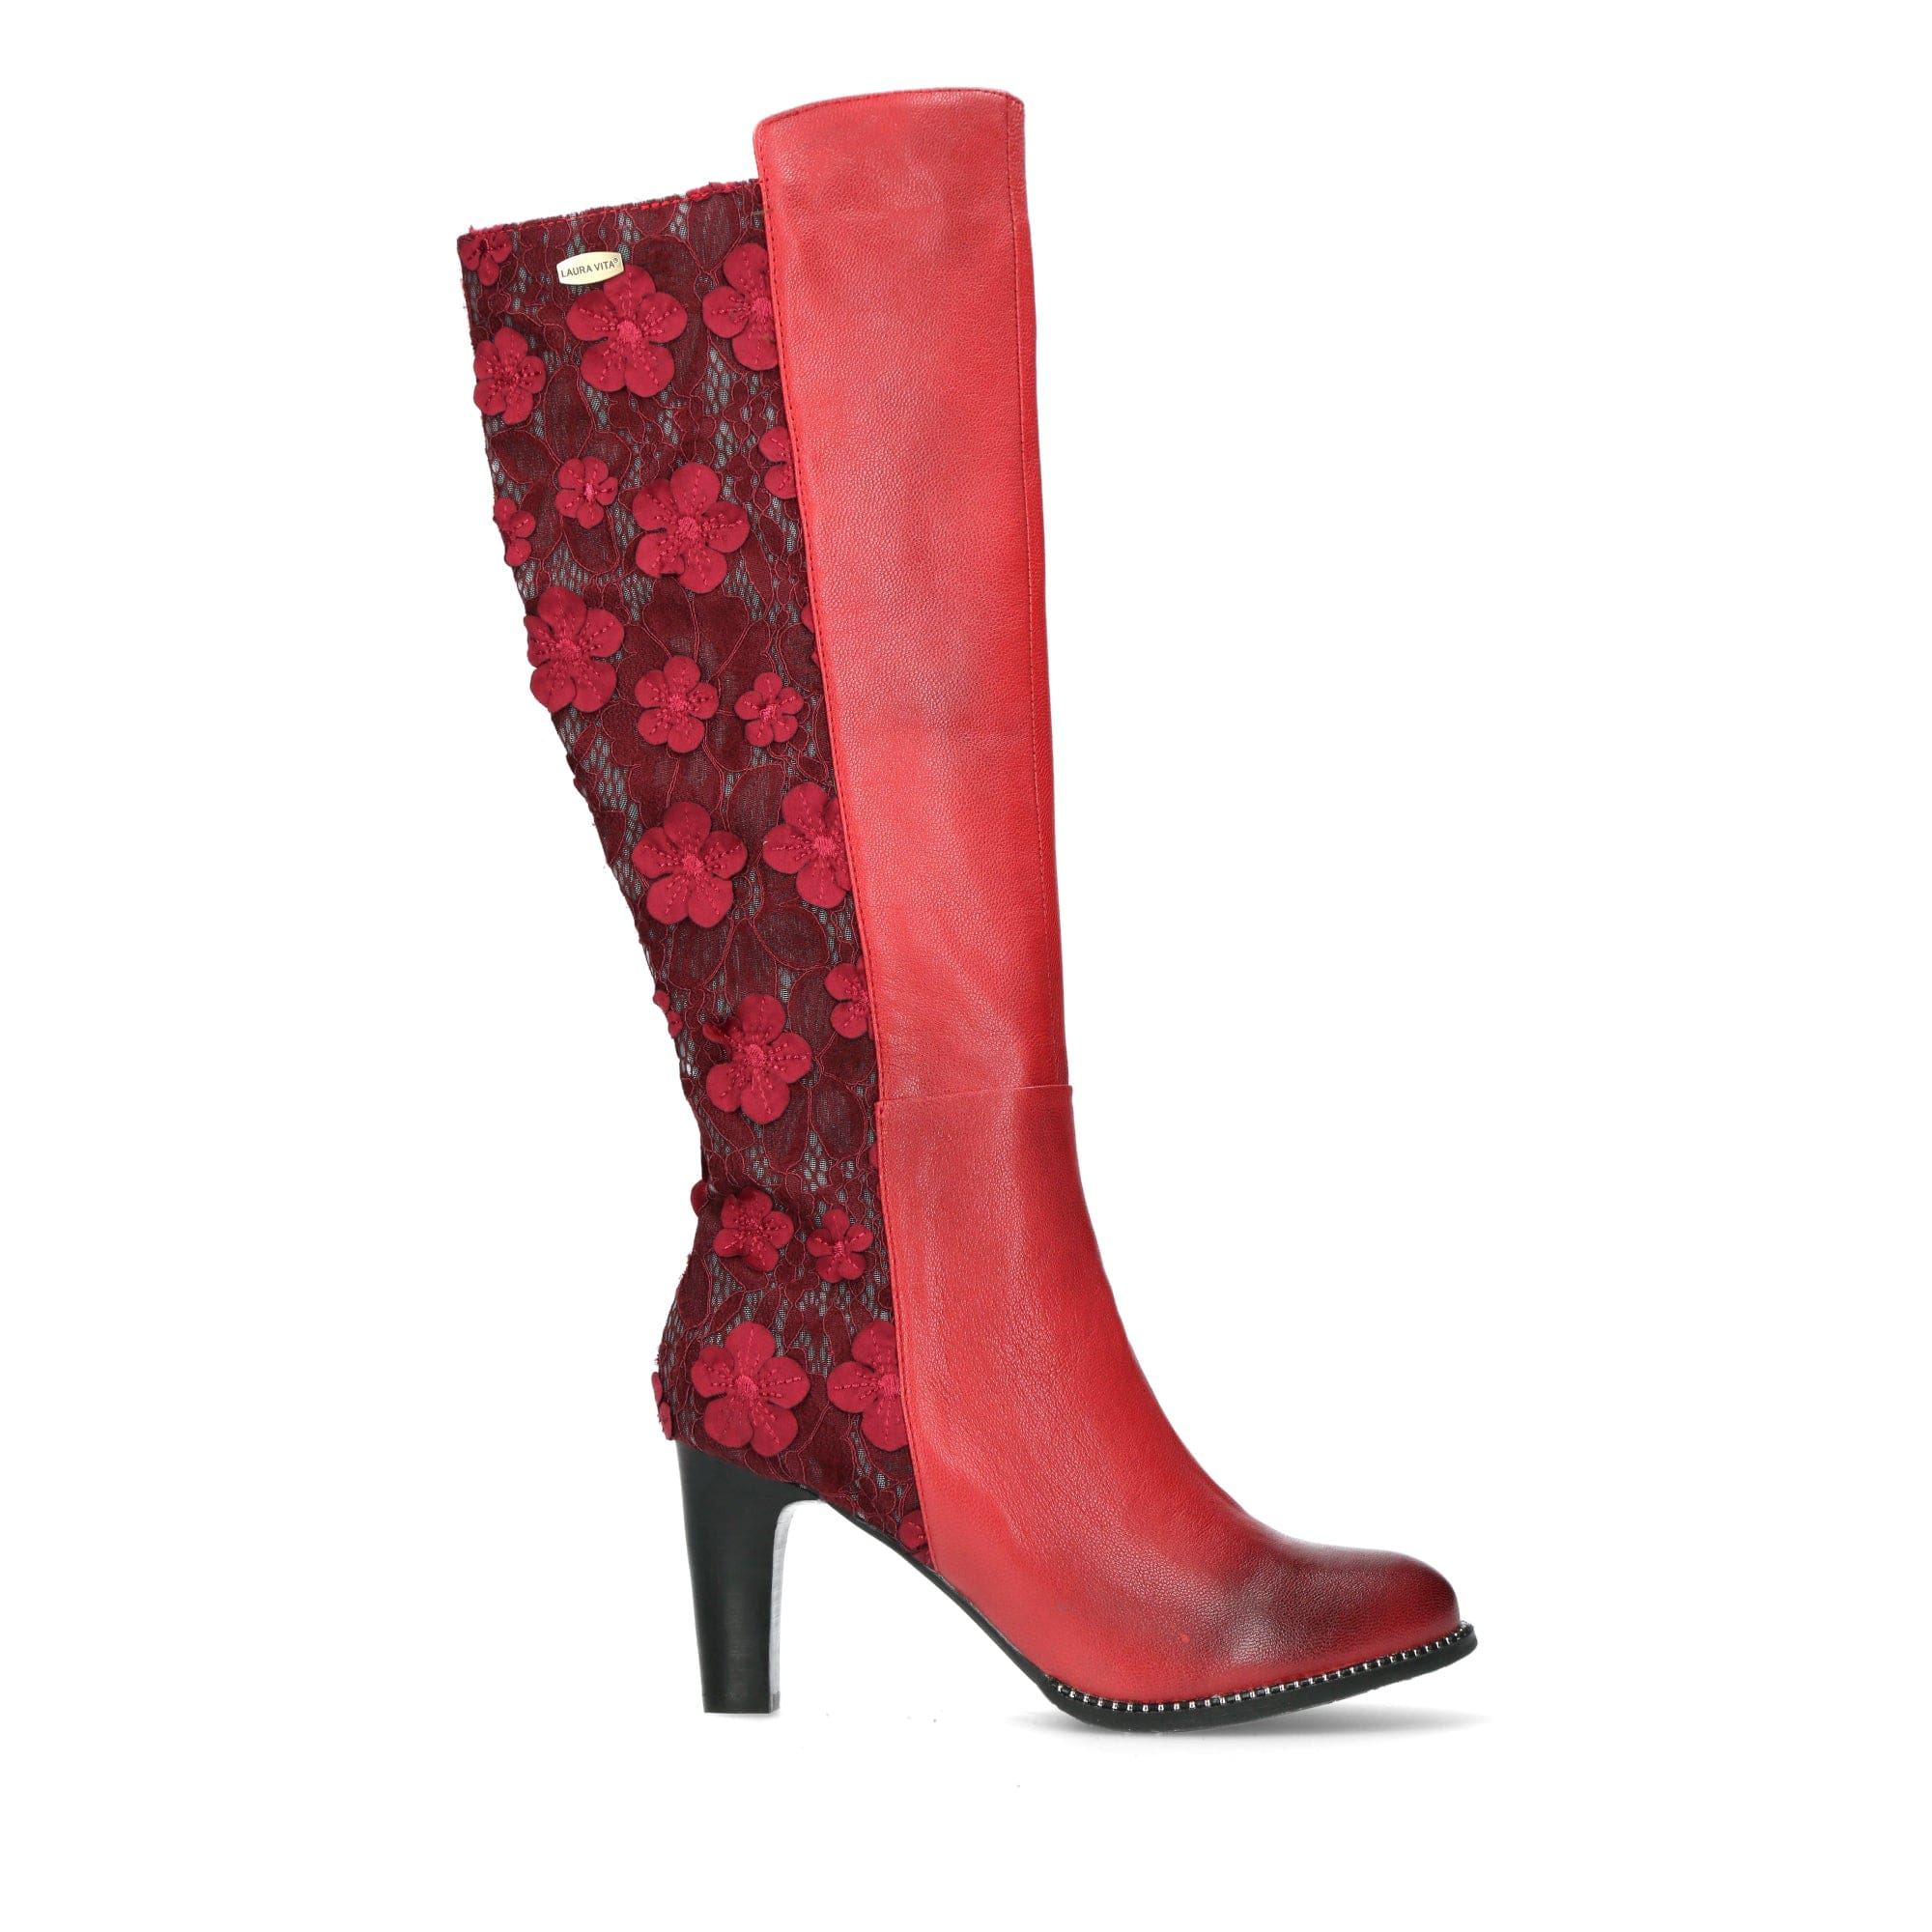 Schuh ALCBANEO 129 - 35 / Rot - Stiefel